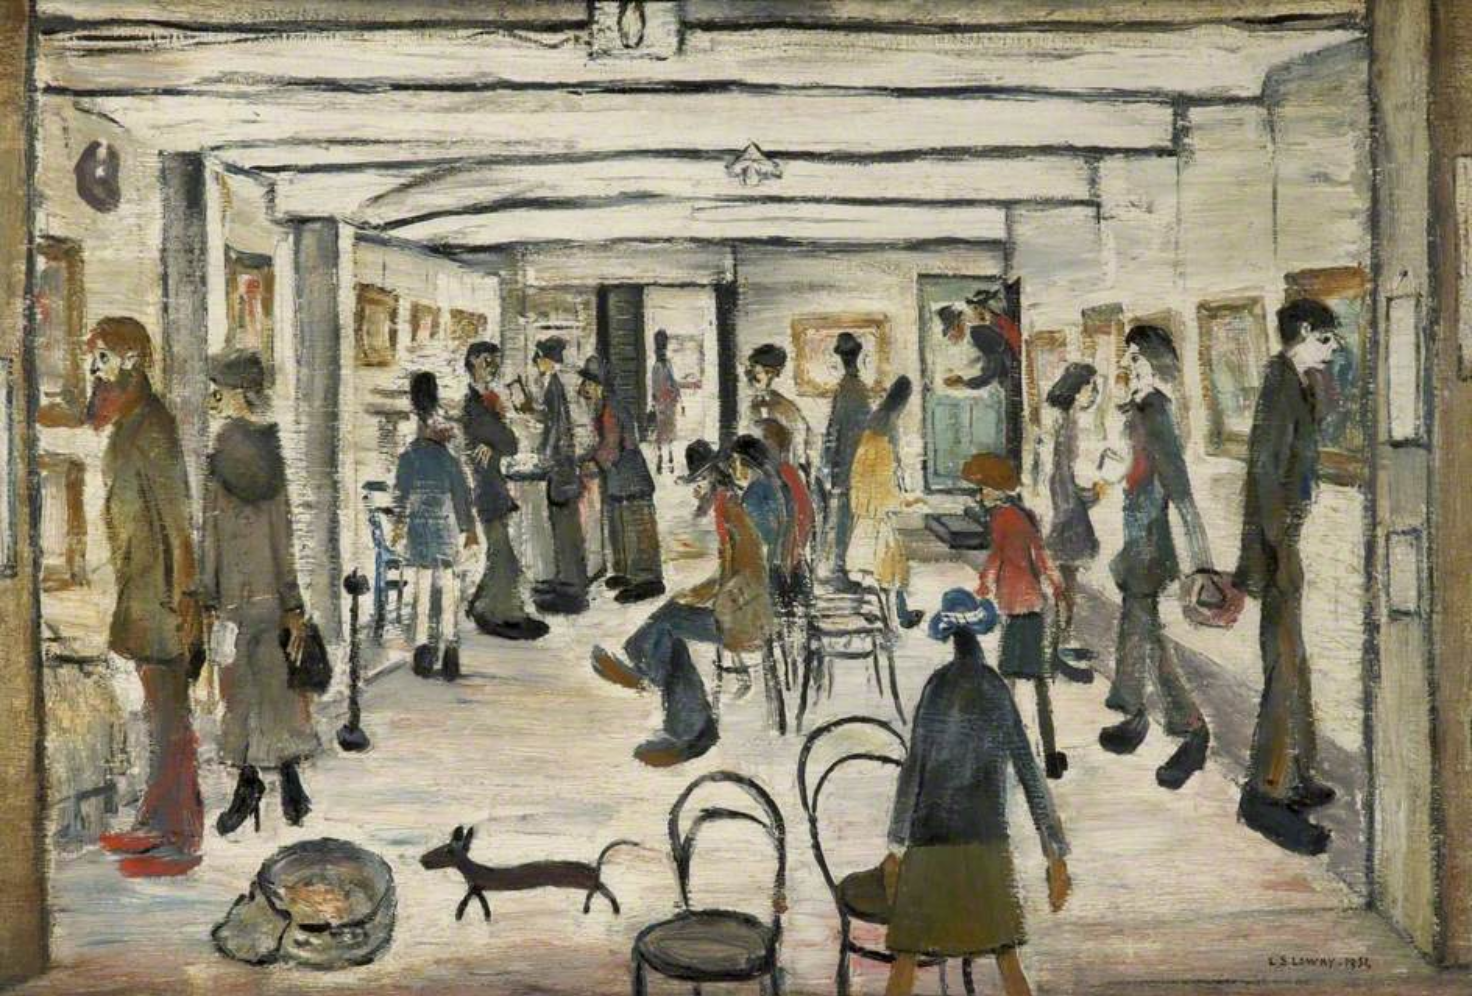 The Mid-Day Studios (1954) by Laurence Stephen Lowry (1887 - 1976), English artist.